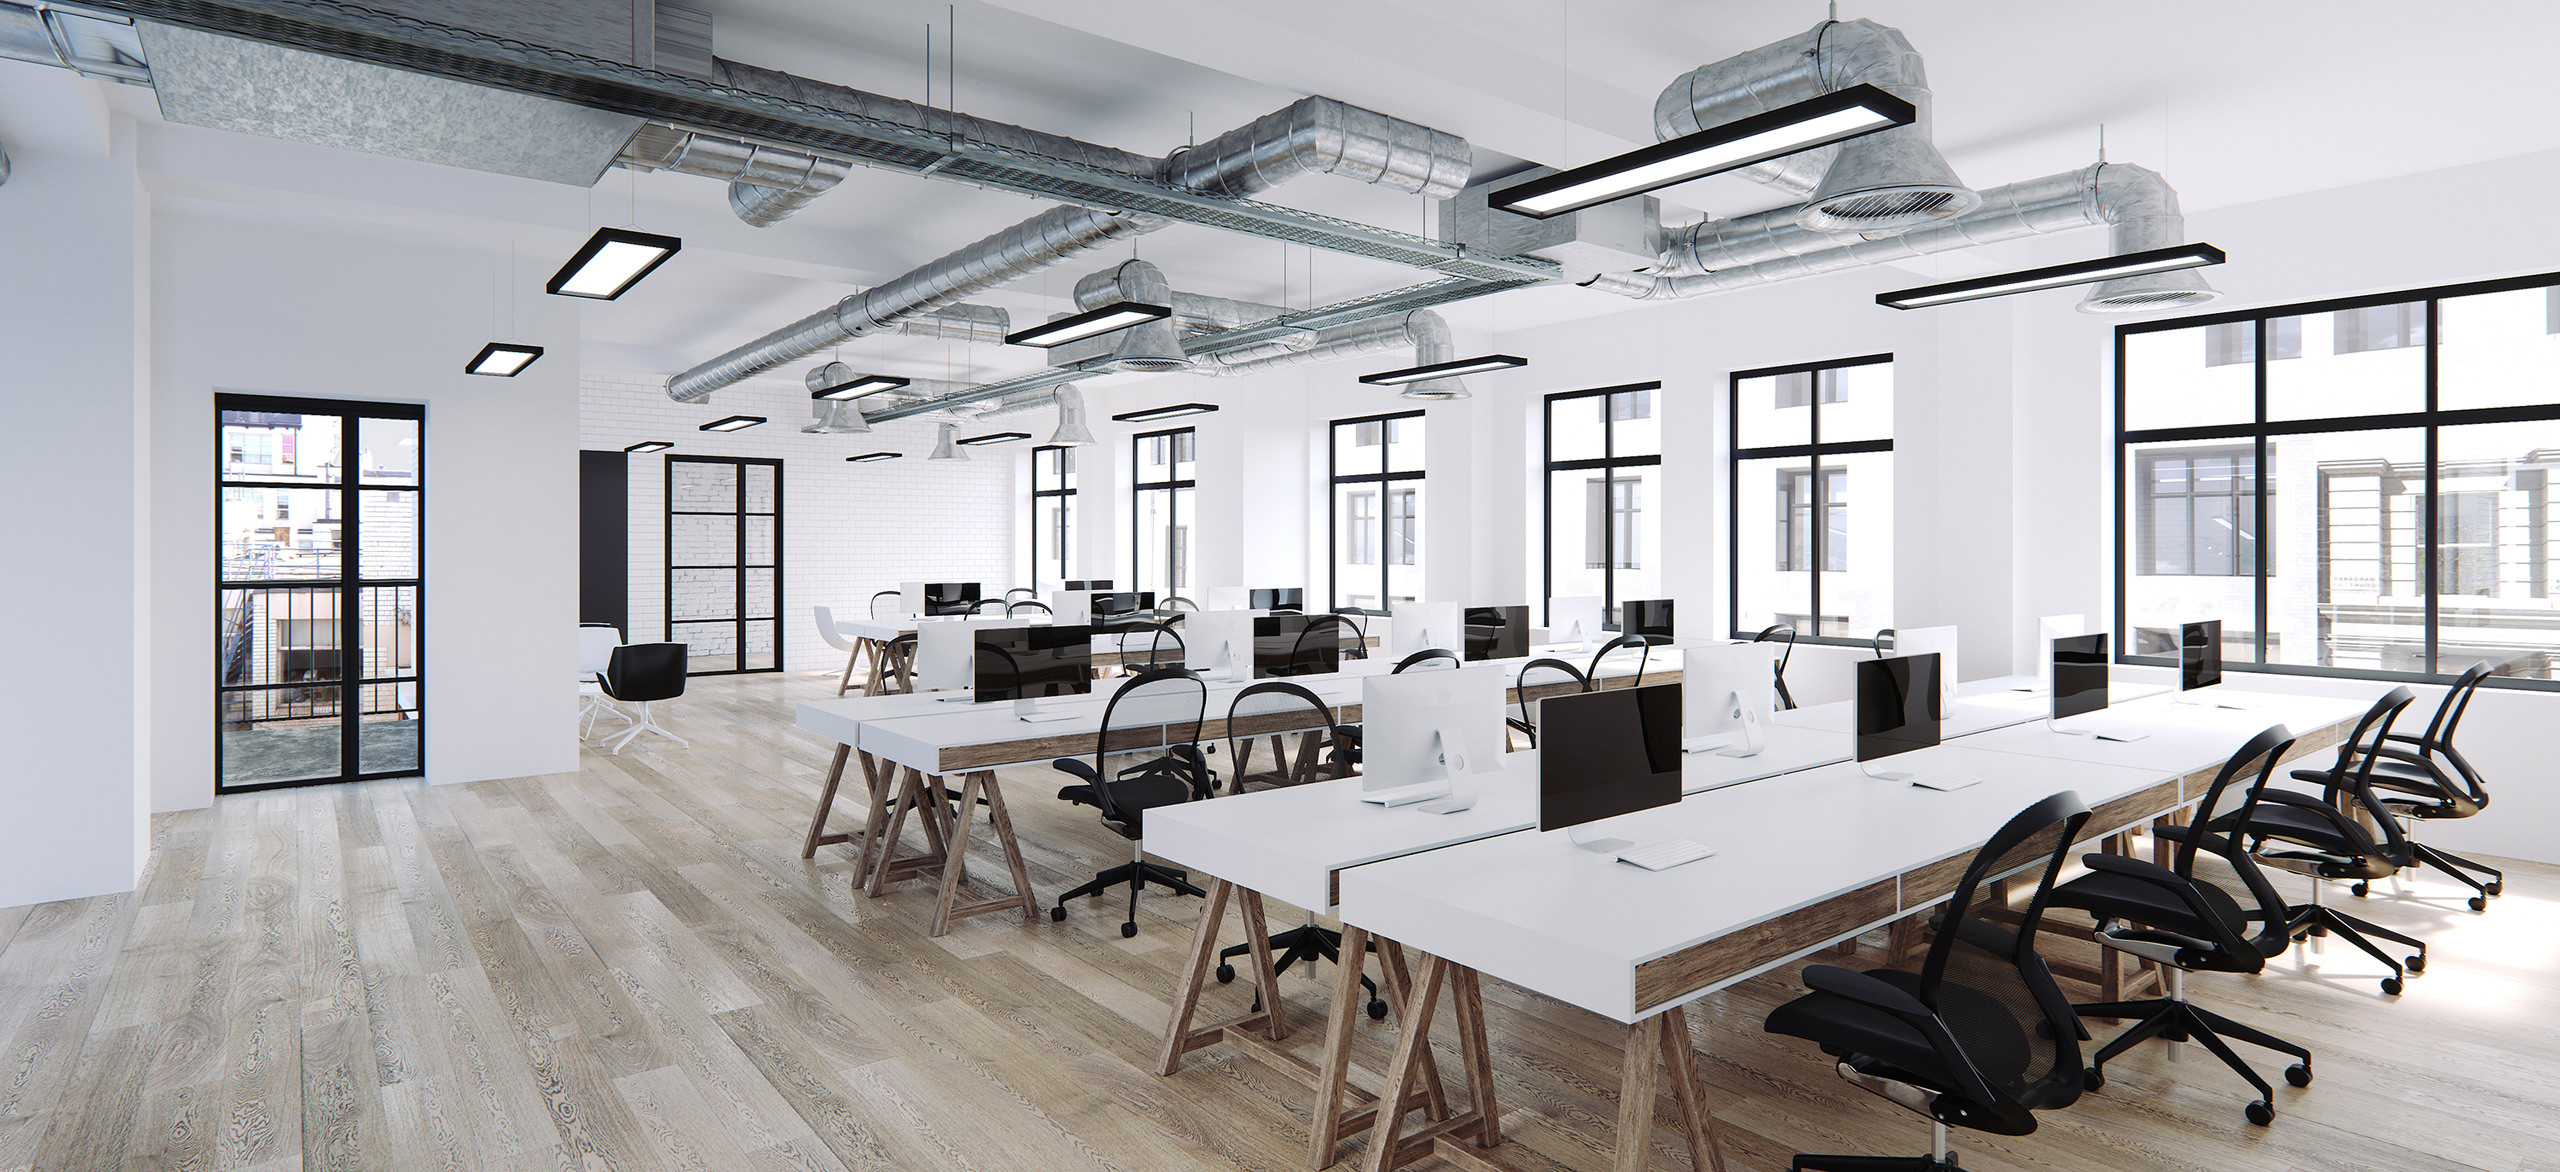 3D rendering of a spacious office rendered in a light austere interior with a silver vent system installed on a ceiling